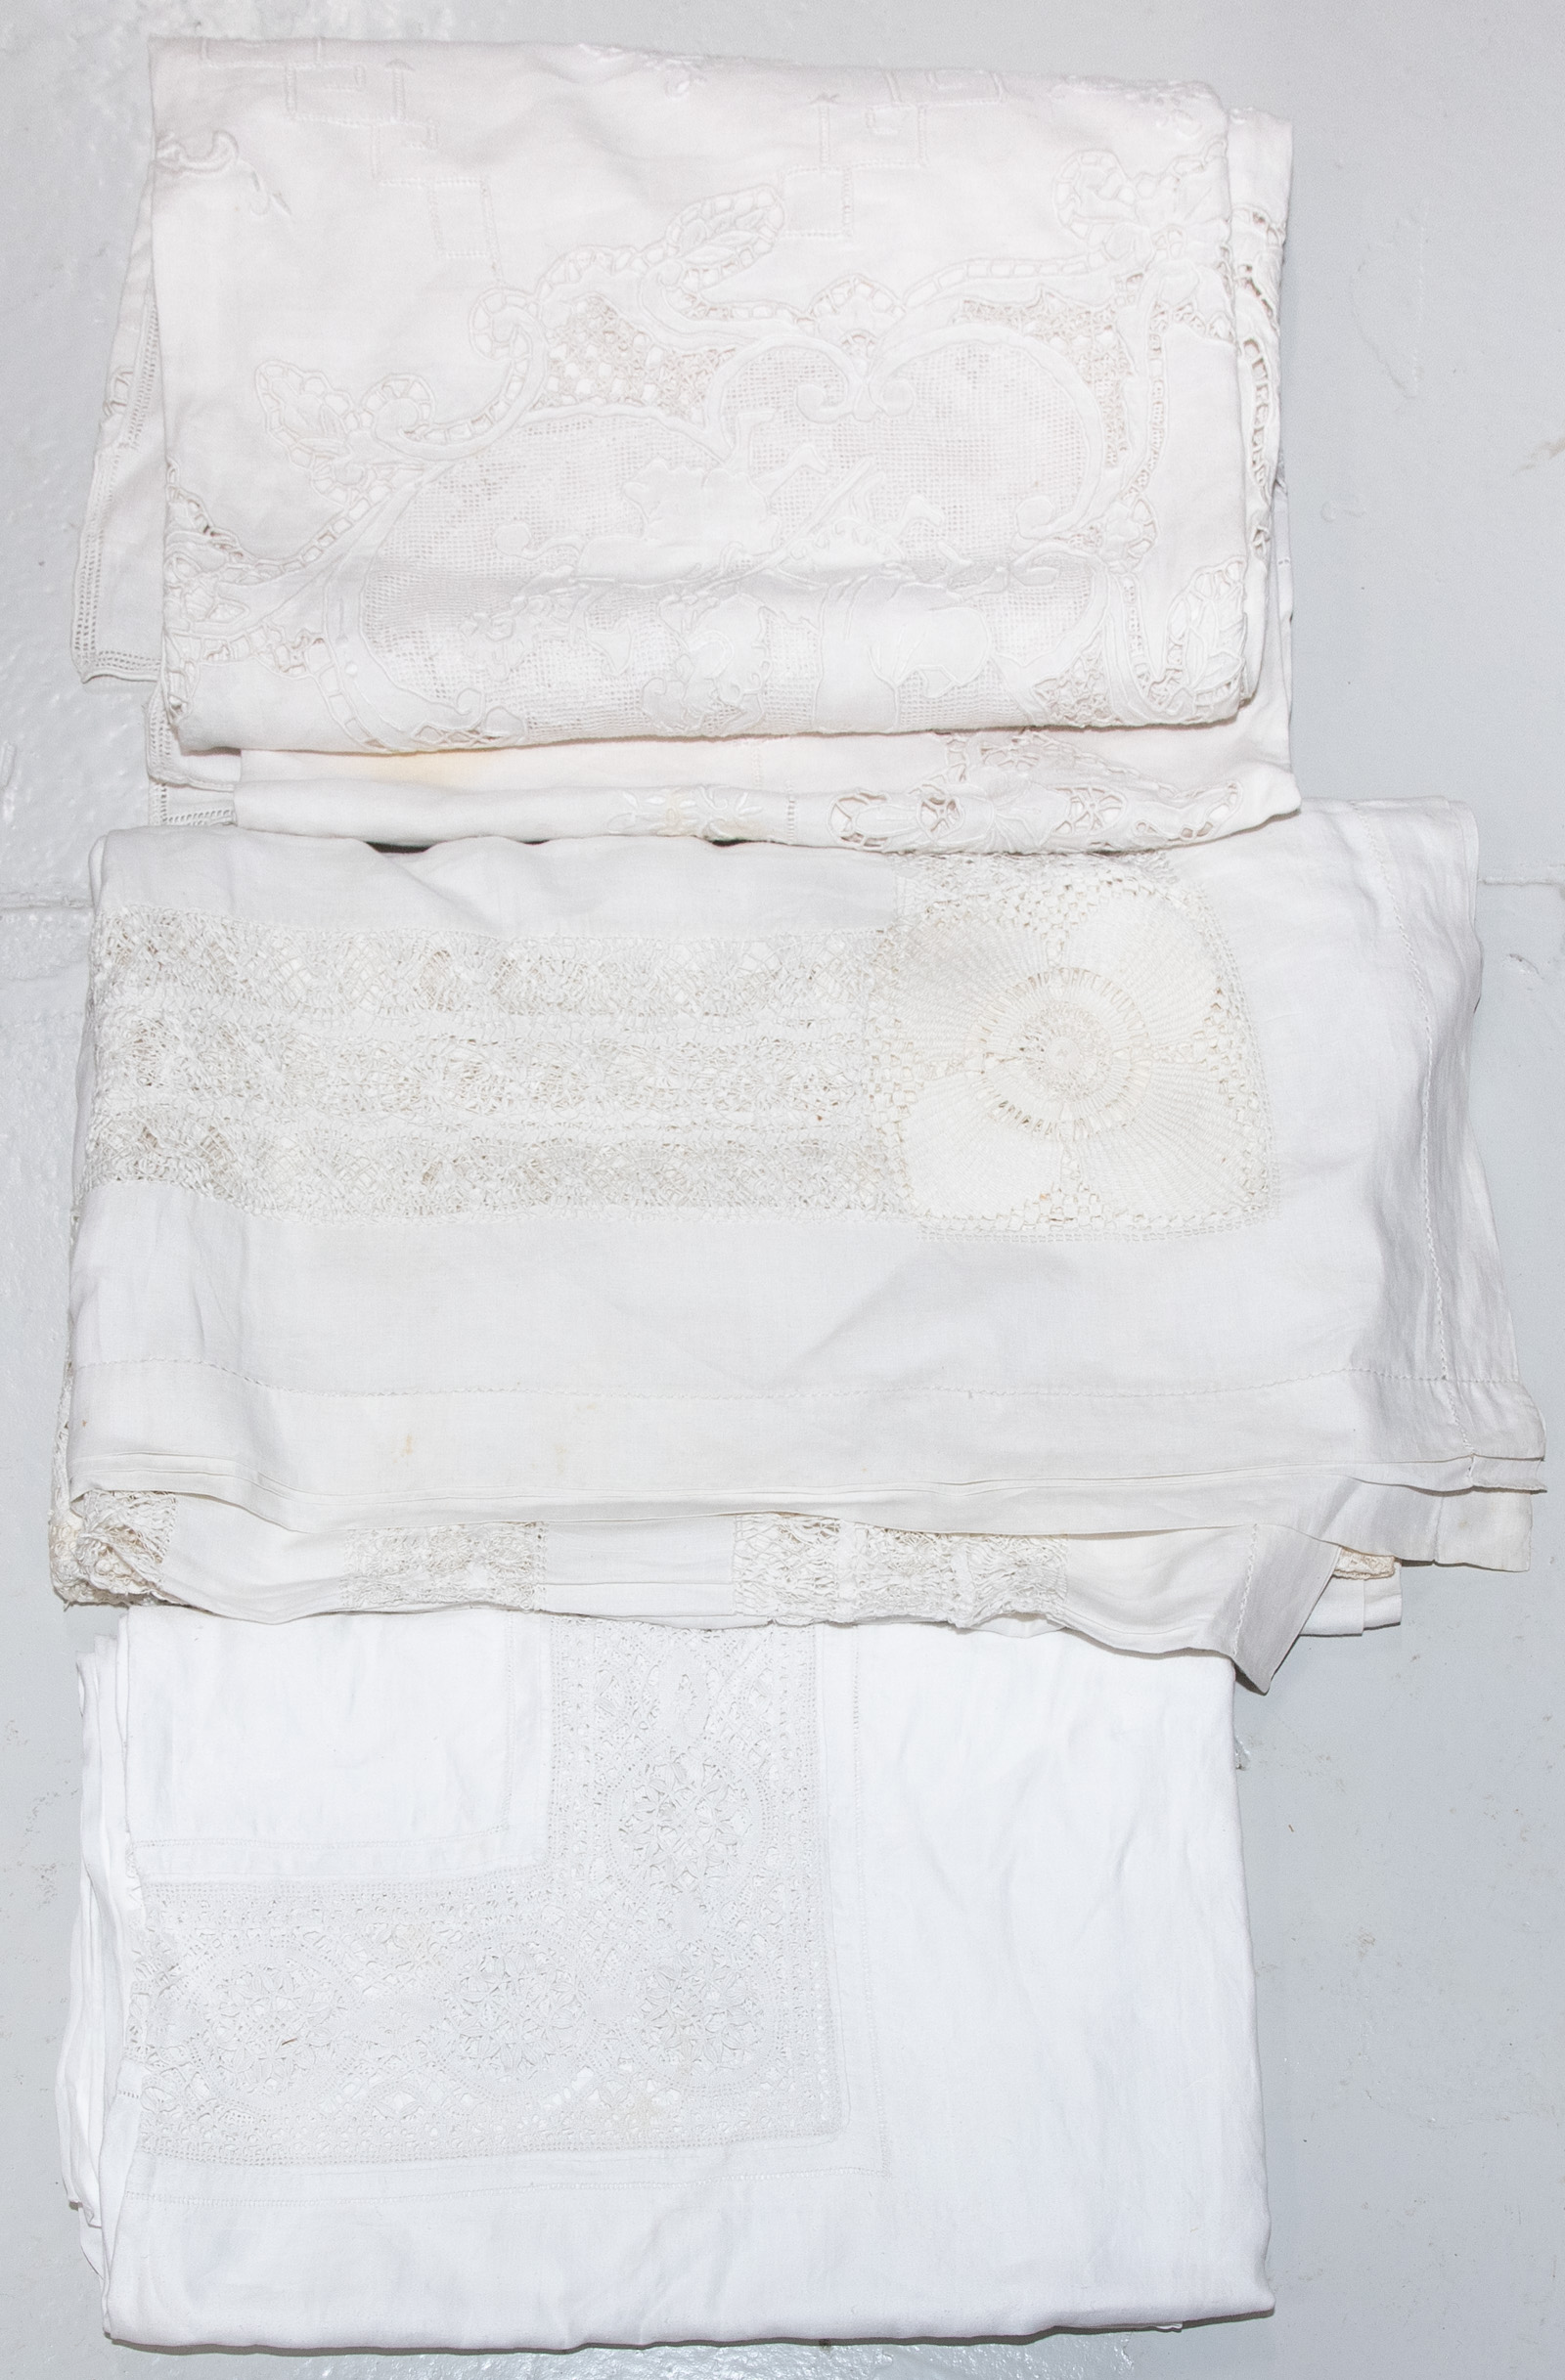 ASSORTMENT OF VINTAGE TABLE LINENS